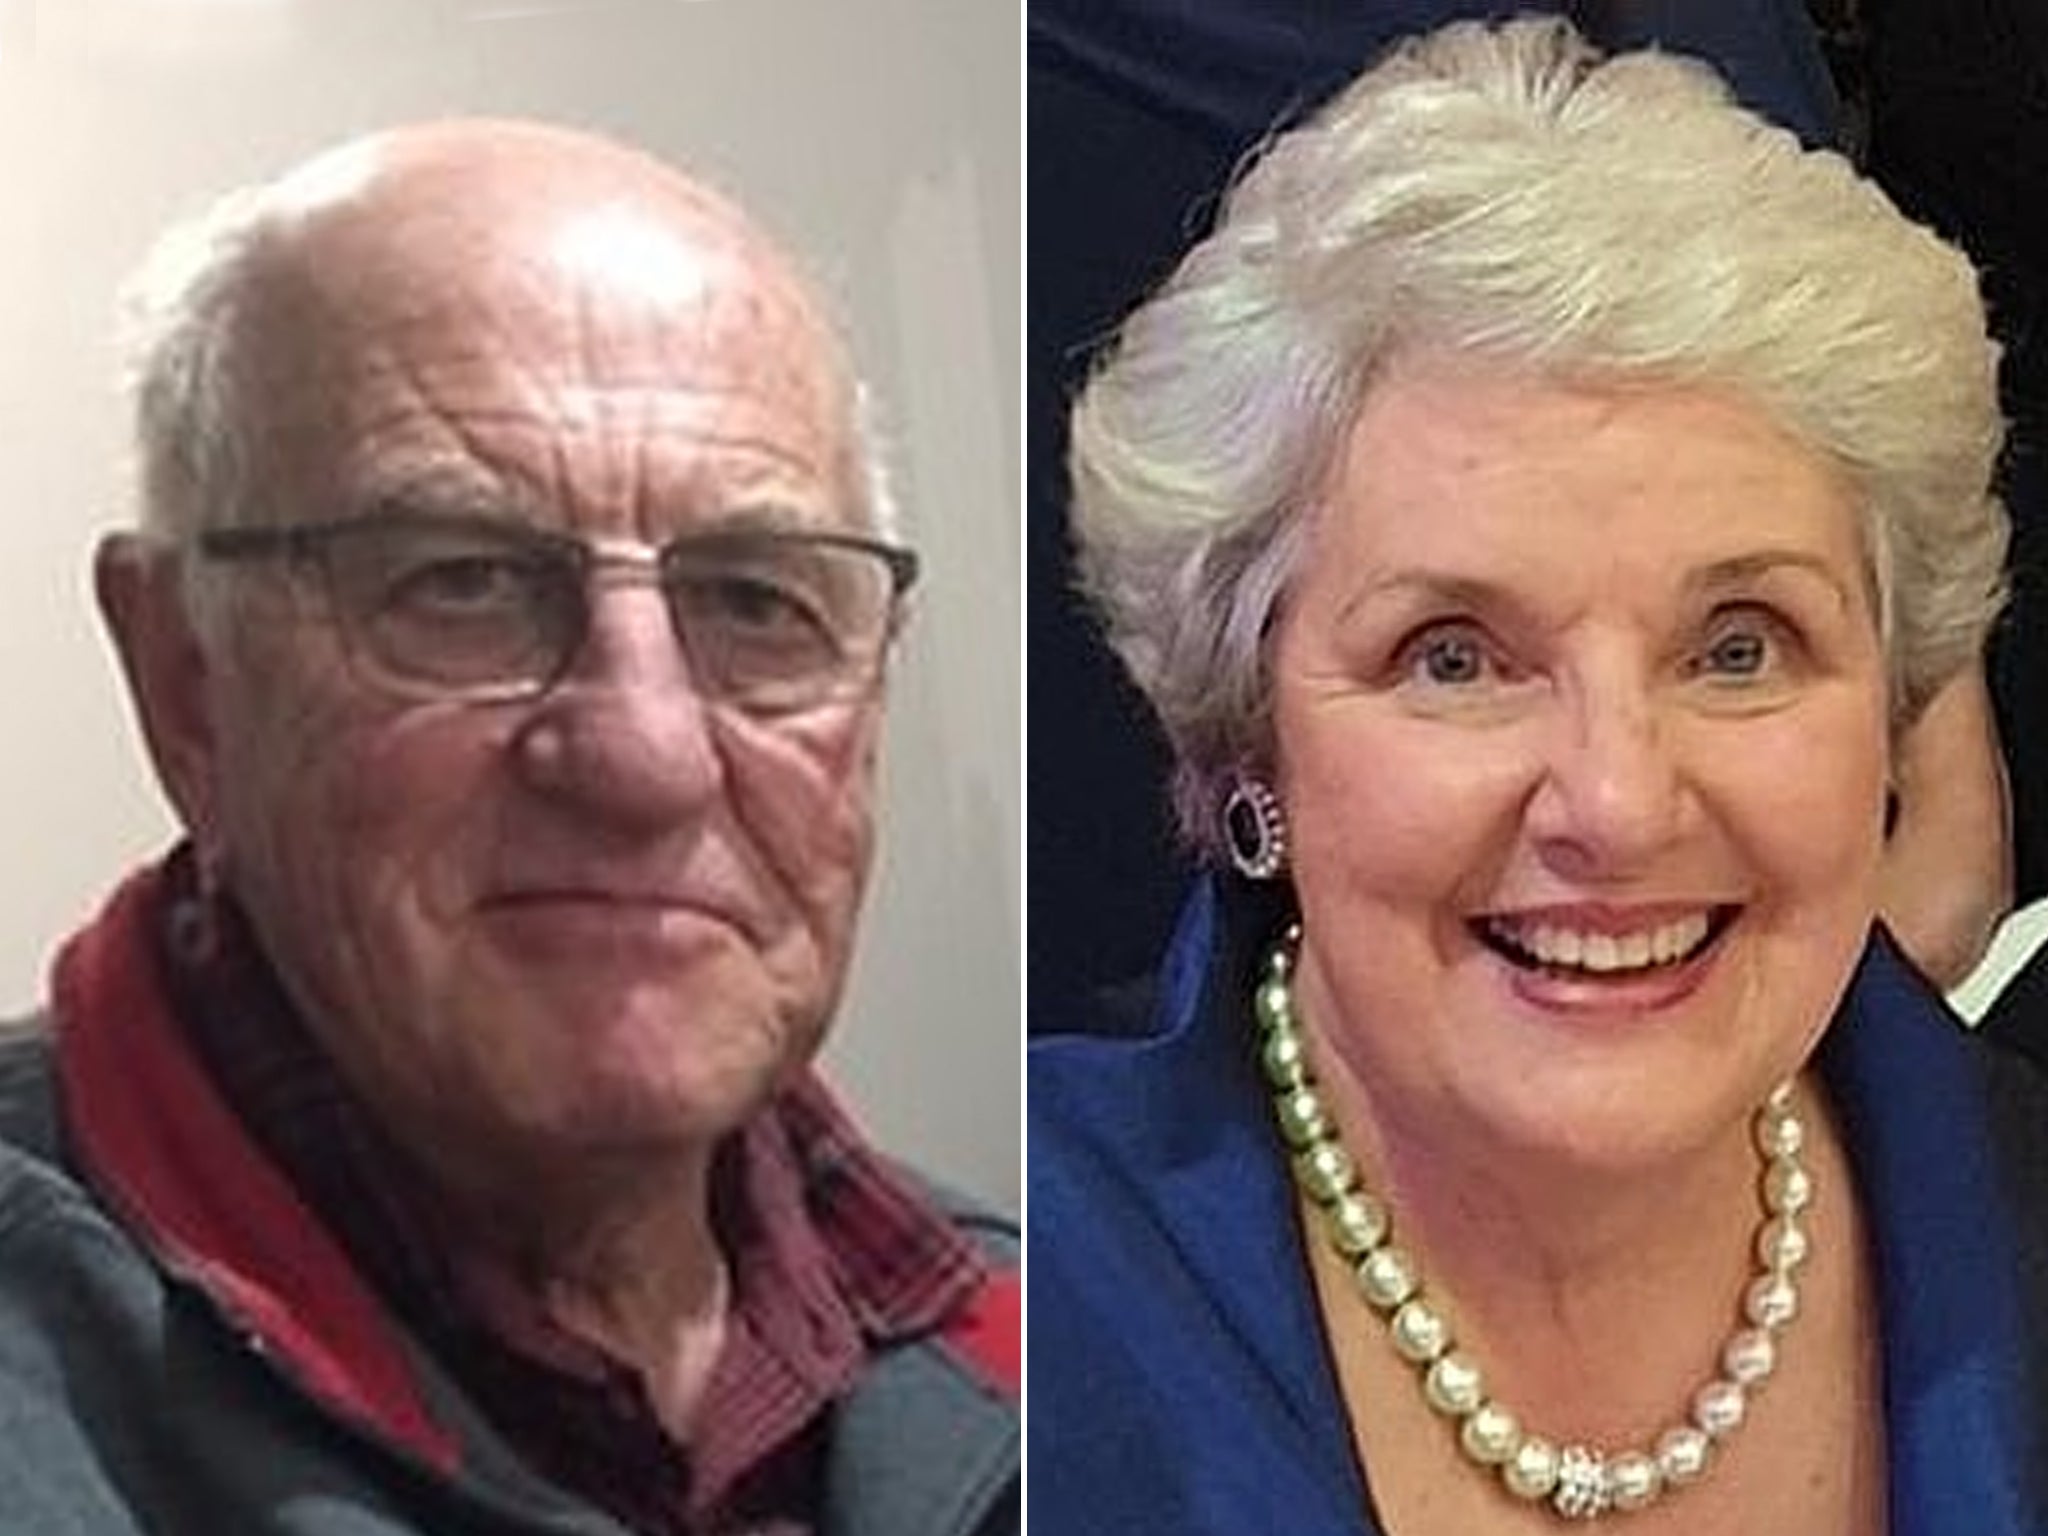 Russell Hill and Carol Clay, missing